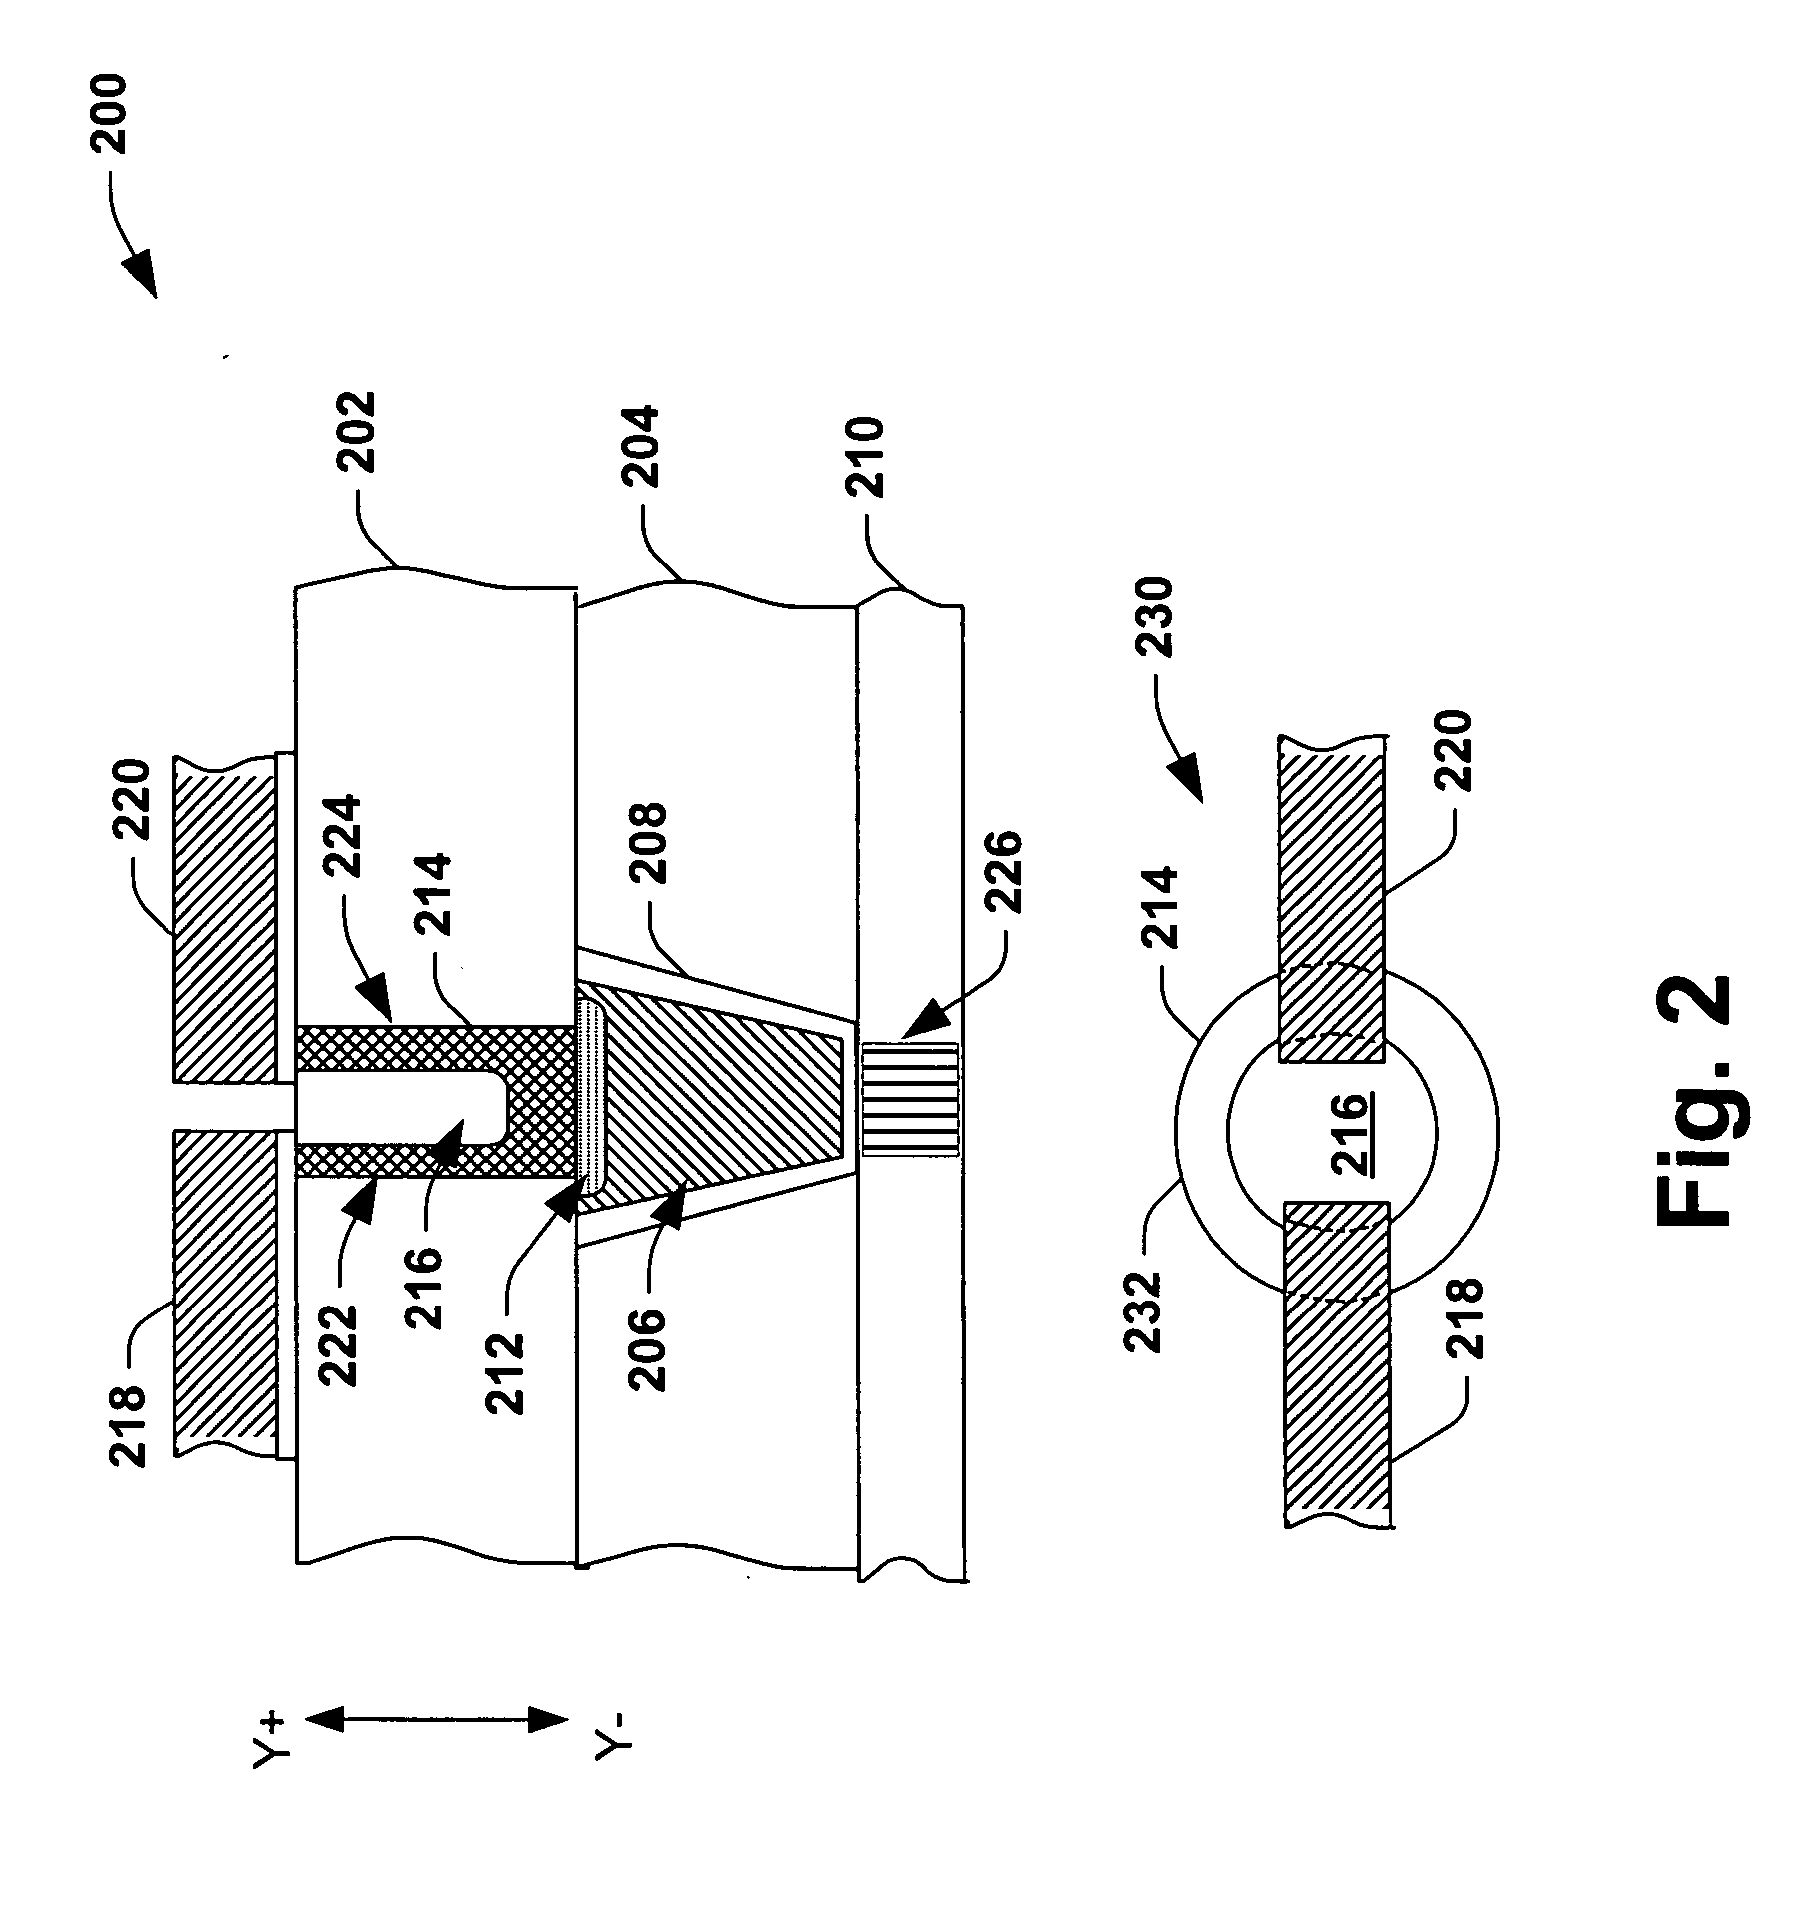 In-situ surface treatment for memory cell formation